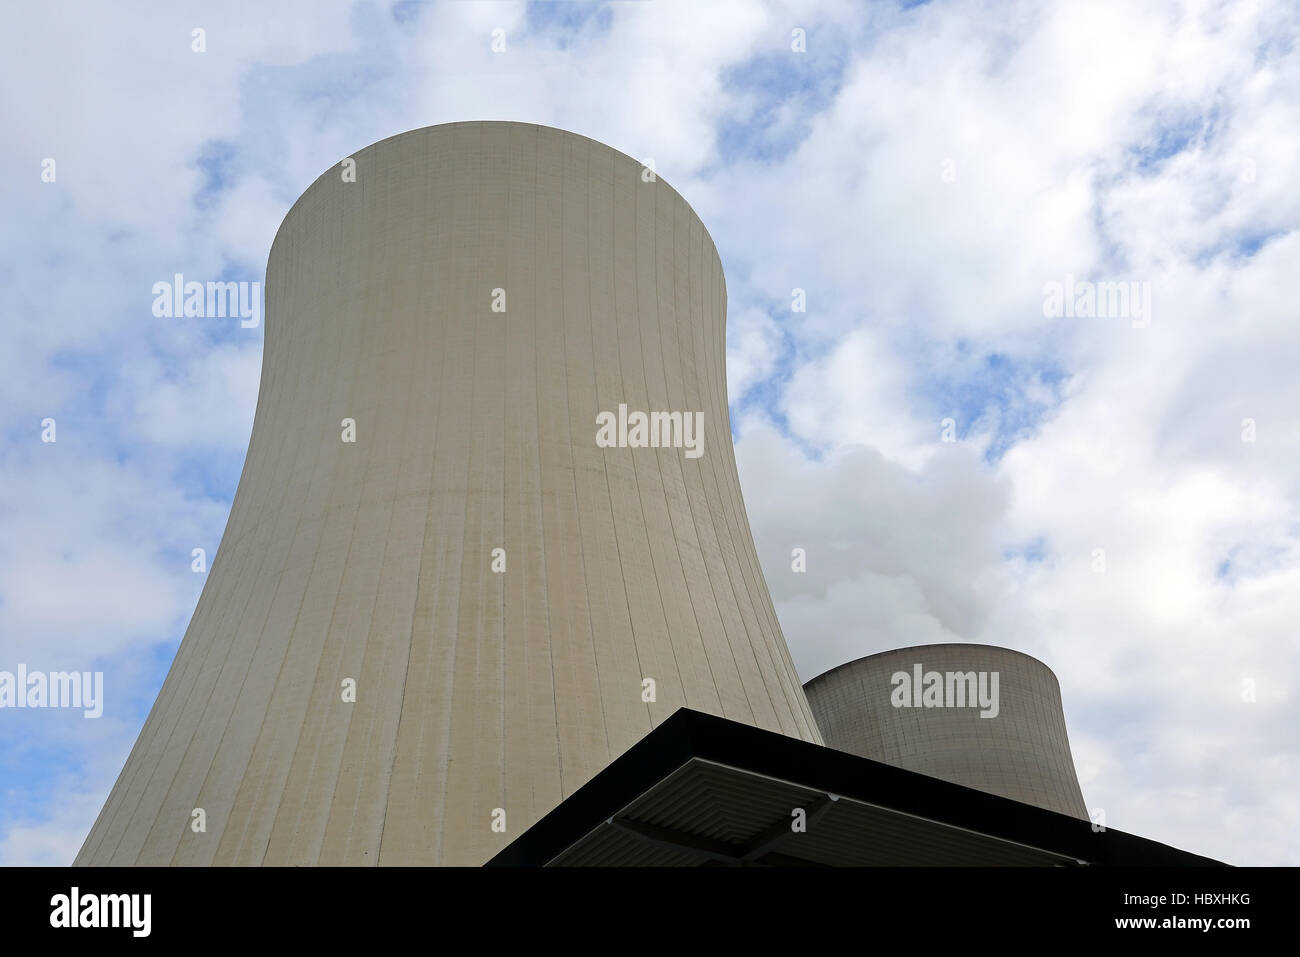 nuclear power plant Stock Photo